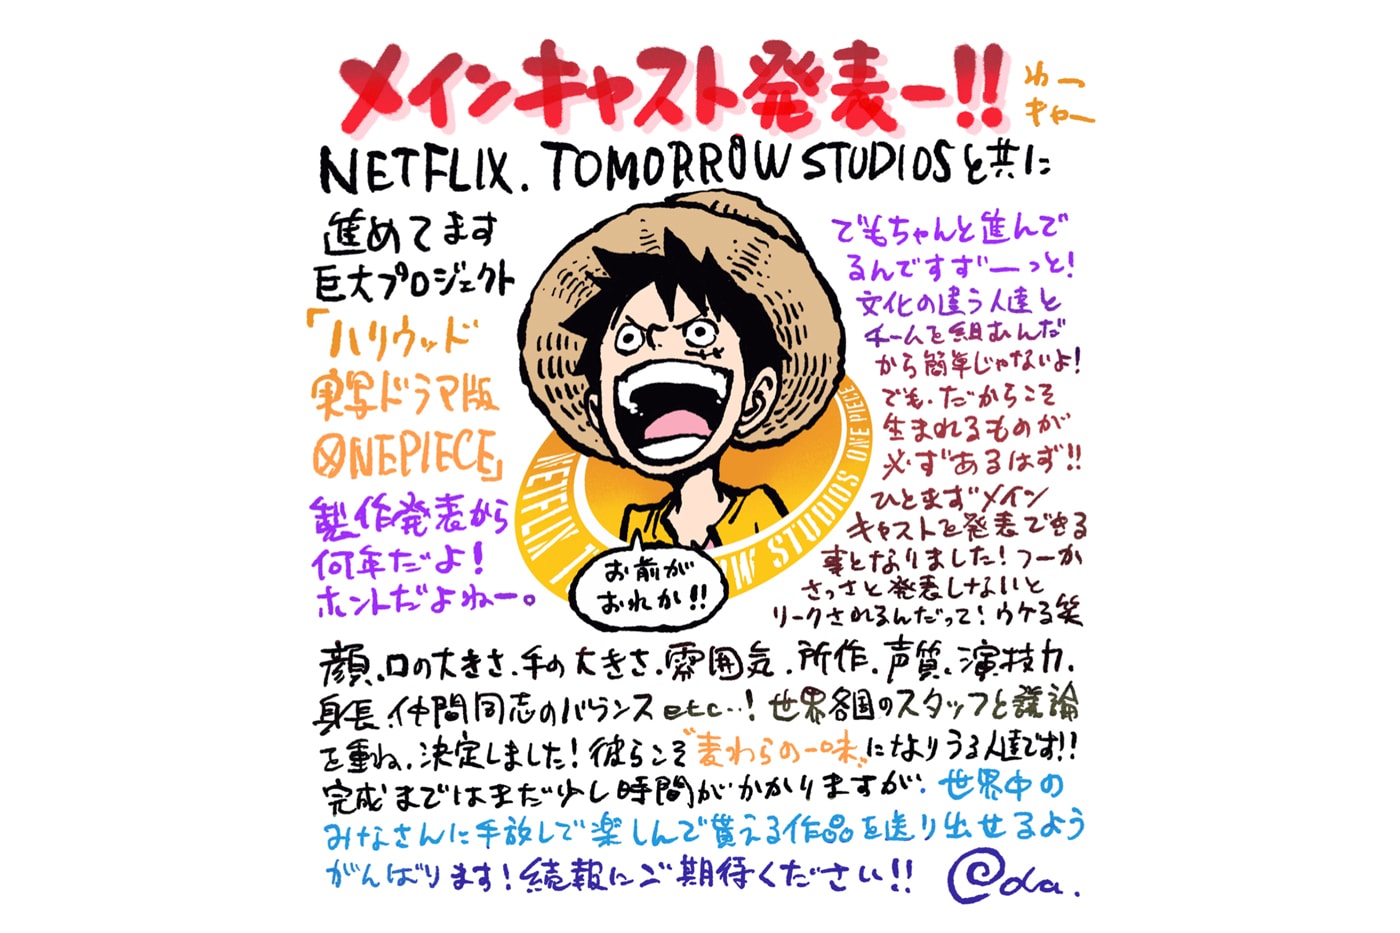 One Piece' Creator Offers Update on Netflix Live-Action Series